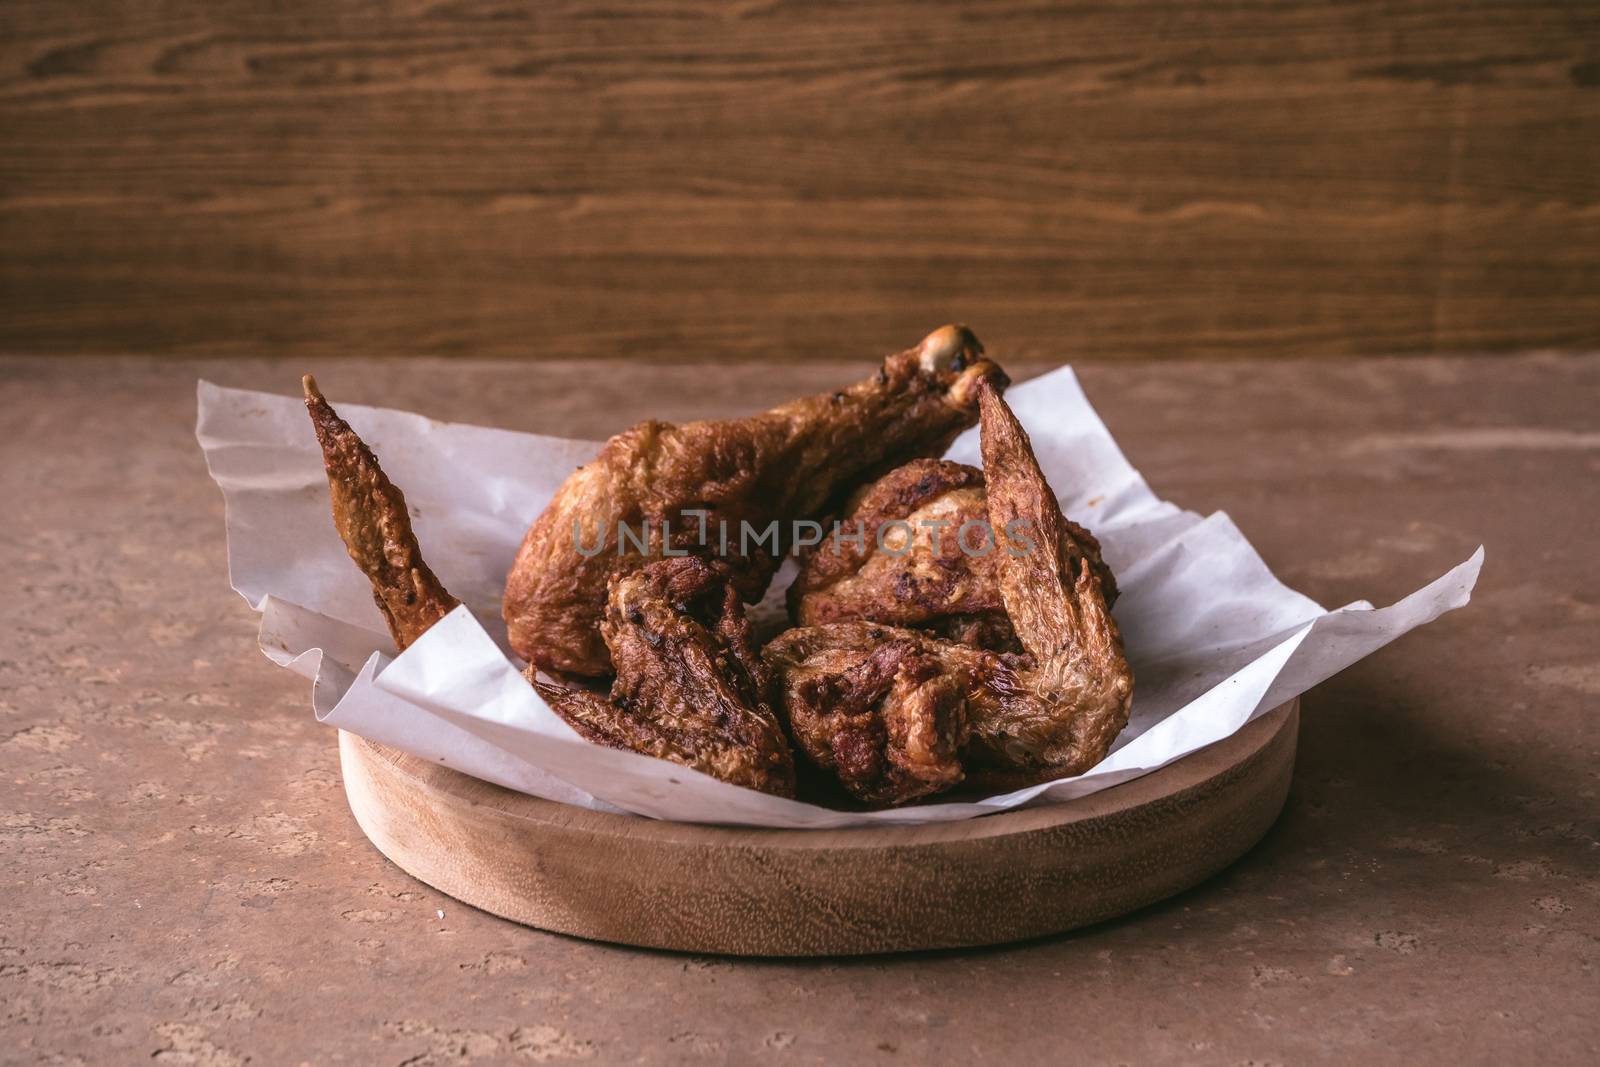 Fried chicken legs and wings in wooden dish on the table.